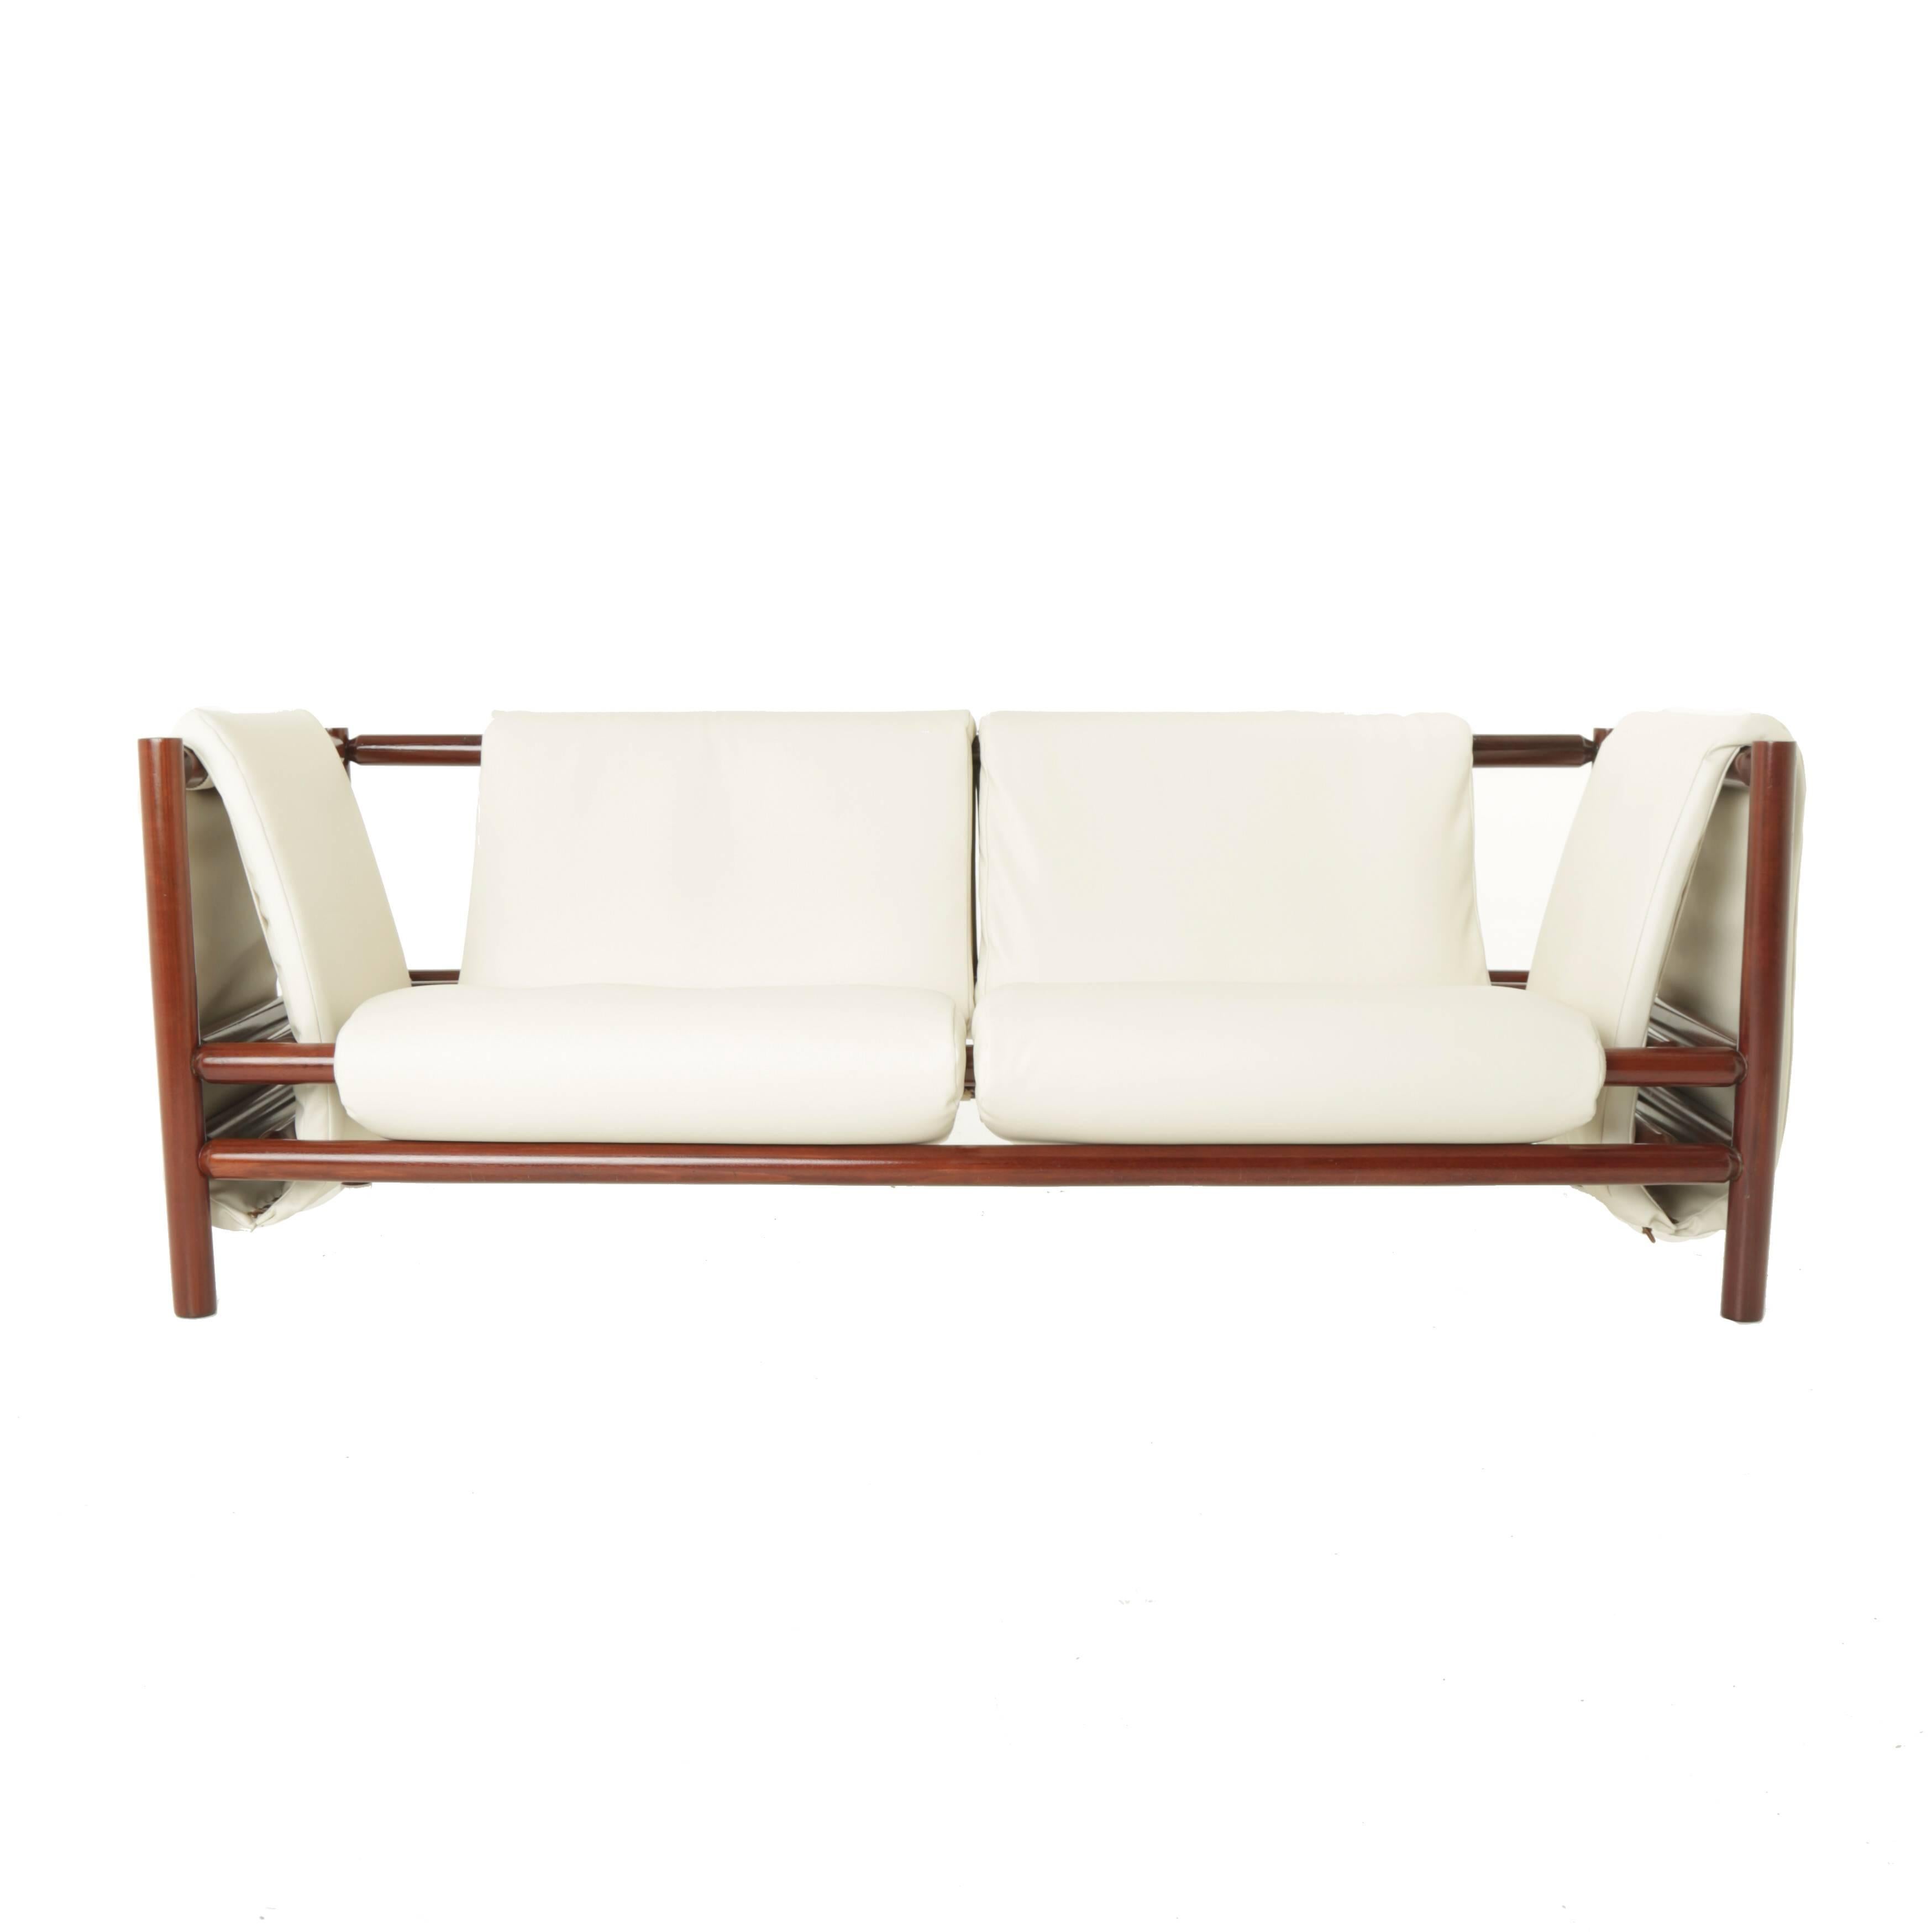 Beautiful Brazilian Loose Mantle sofa is Solid Pau Ferro by Joaquim Tenreiro

Acquired from from the Bloch Editores publishing house in a bankruptcy auction in the early 2000s.

Many pieces are stored in our warehouse, so please click on